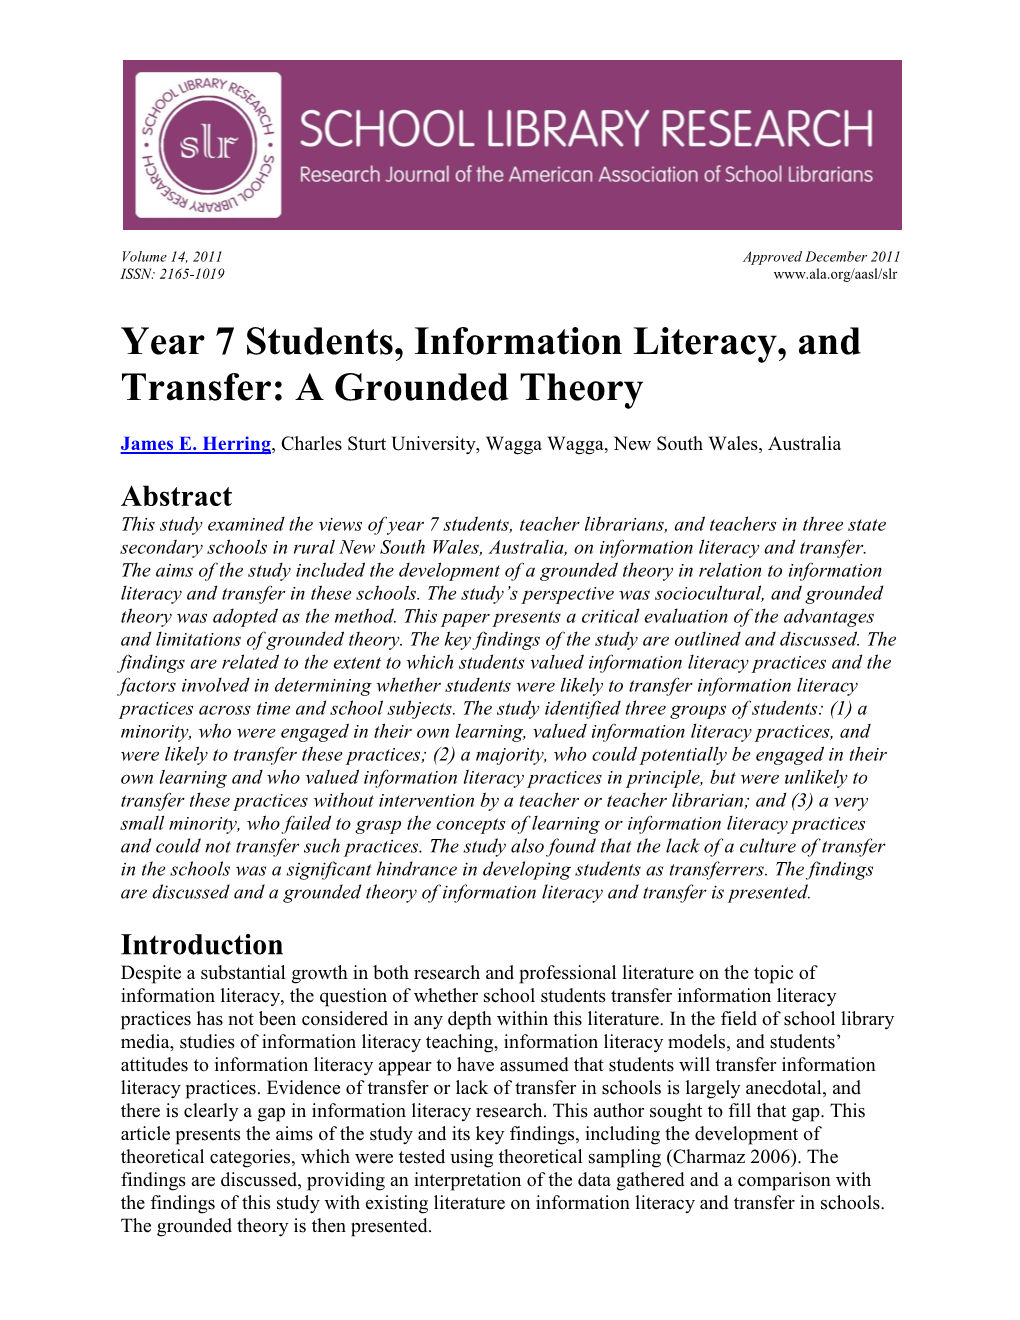 Year 7 Students, Information Literacy, and Transfer: a Grounded Theory